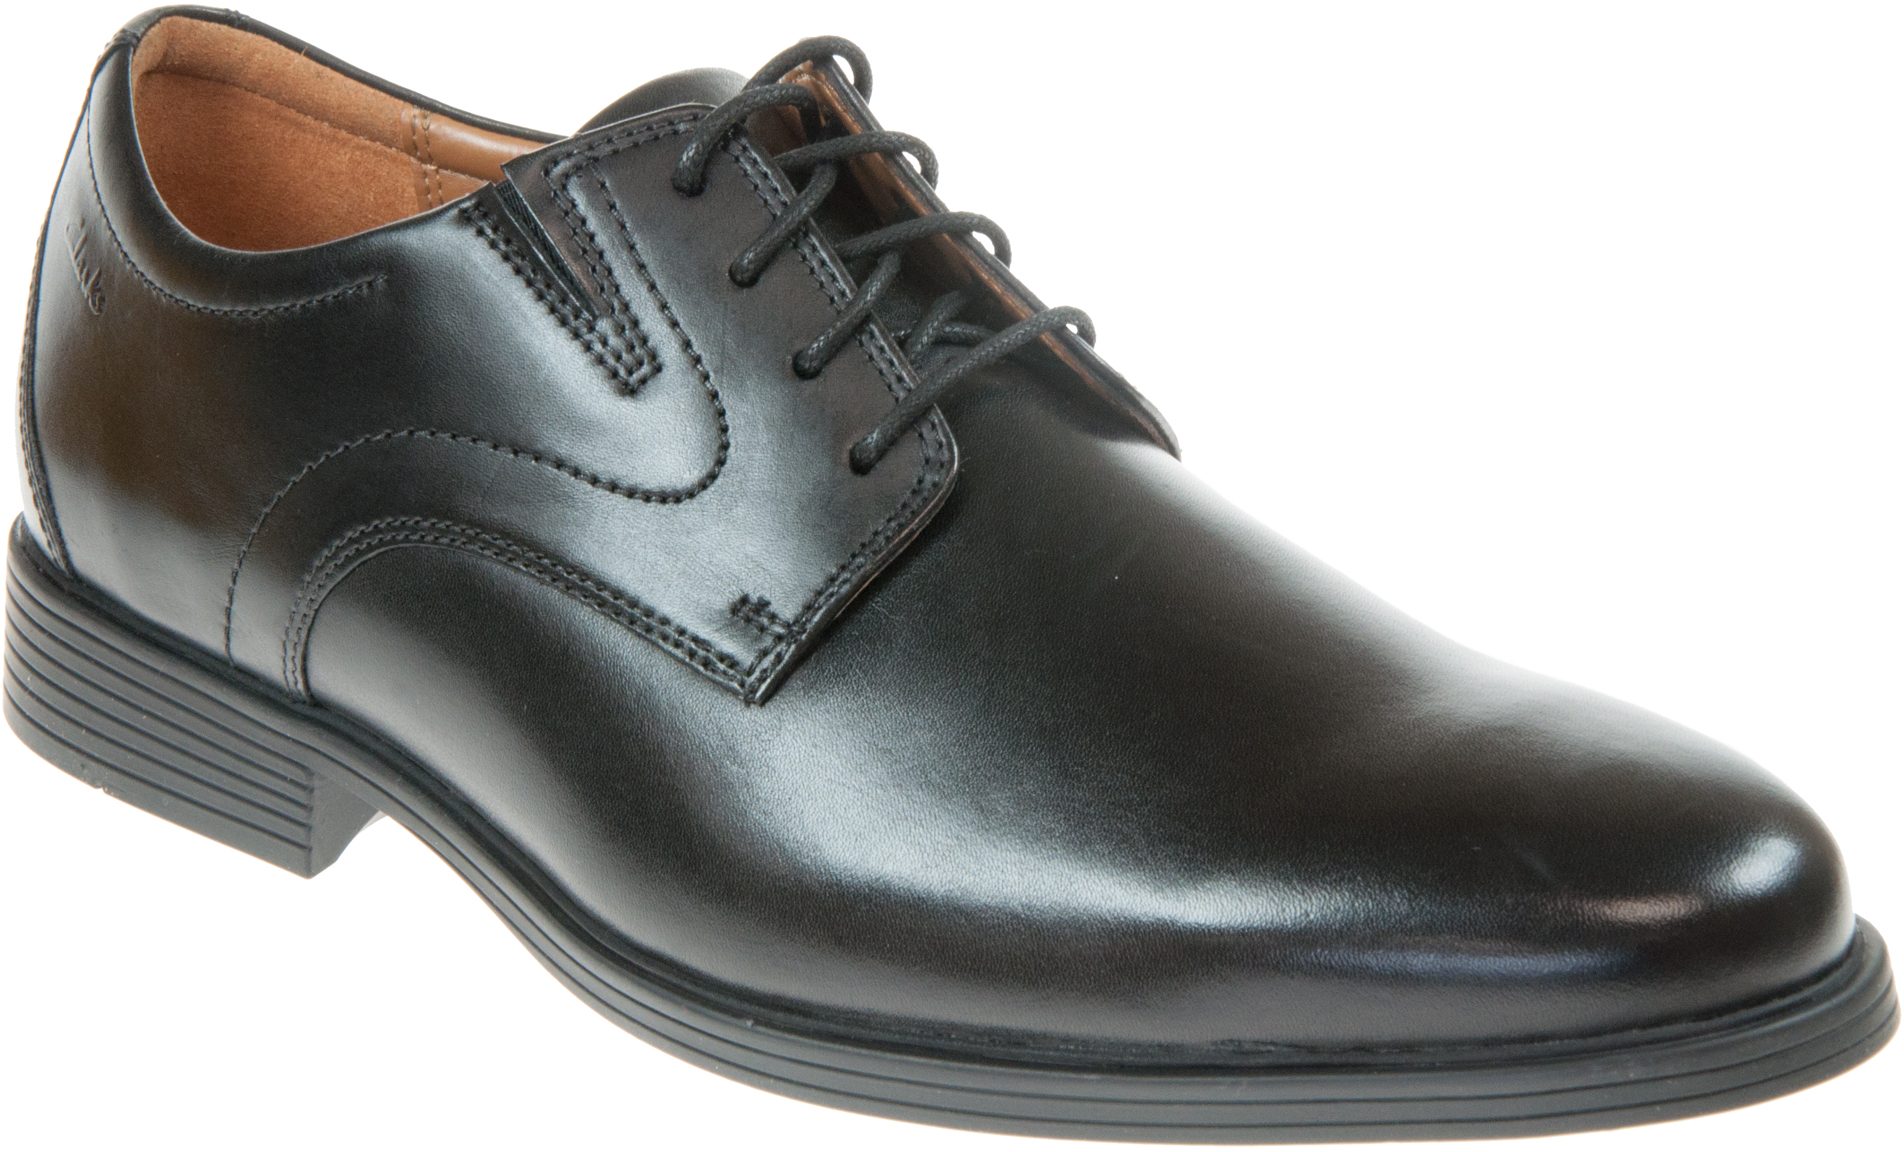 Clarks Whiddon Plain Black Leather 26152918 - Formal Shoes - Humphries ...